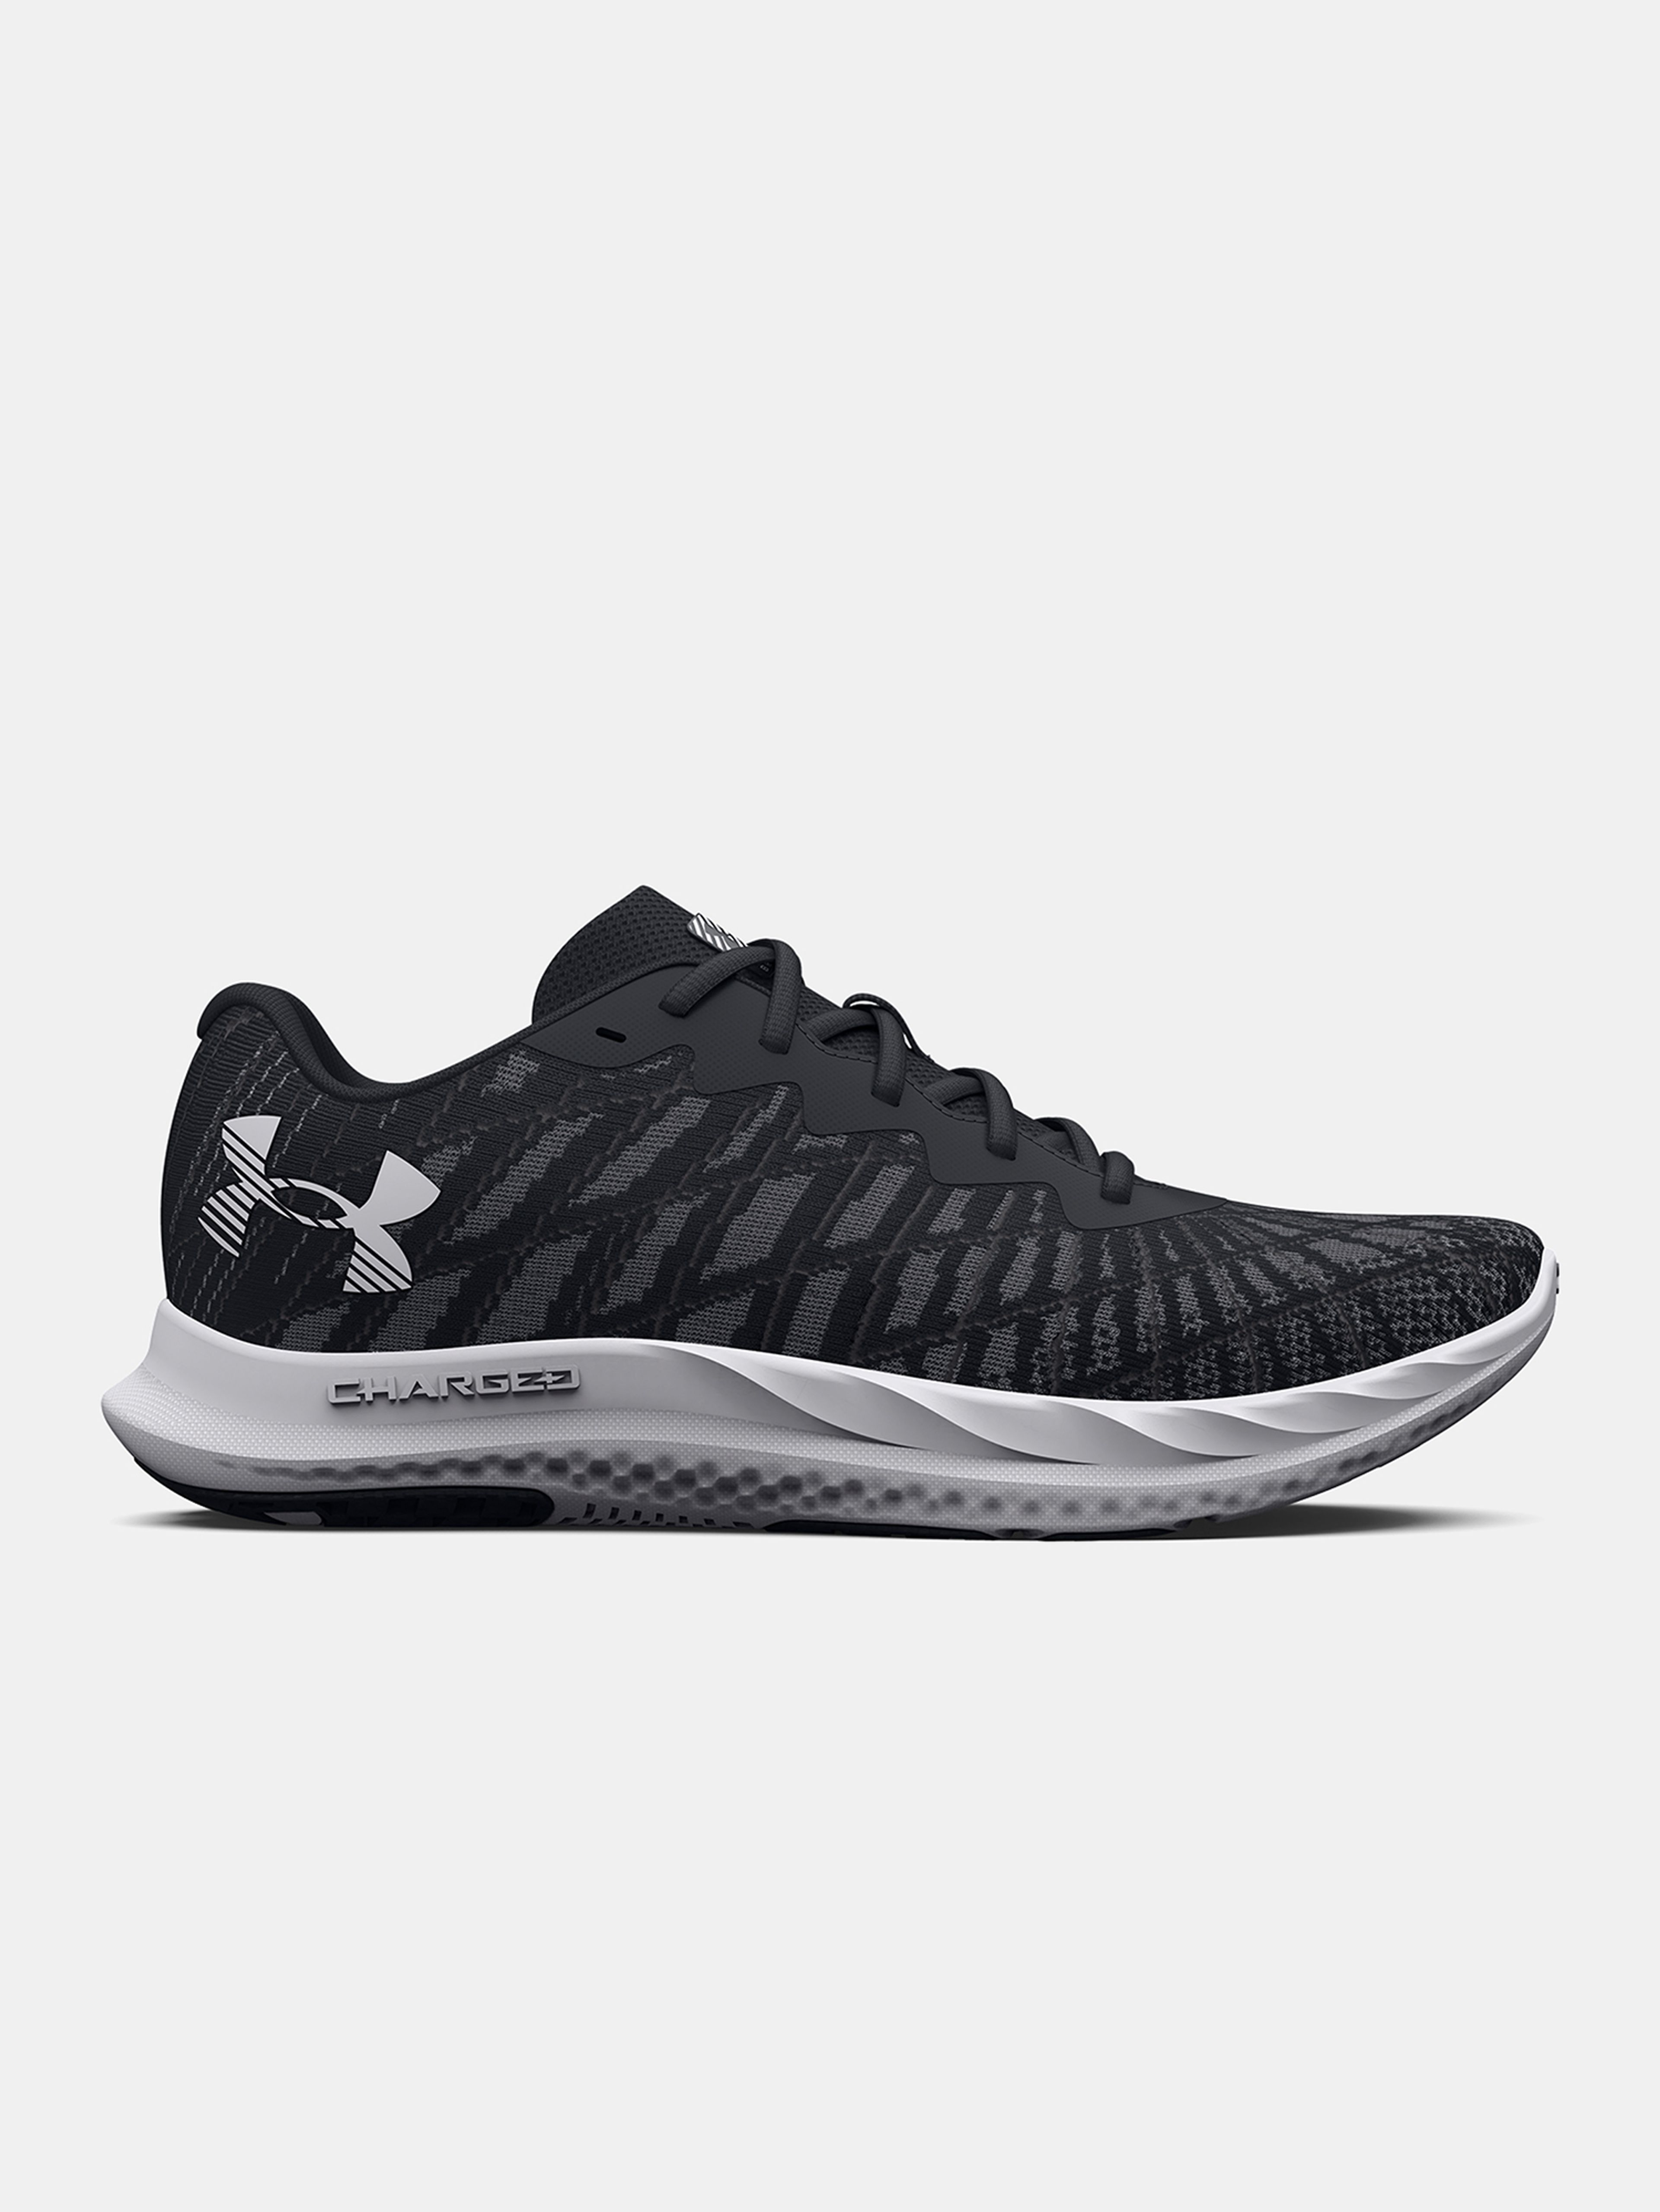 Boty Under Armour UA Charged Breeze 2-BLK